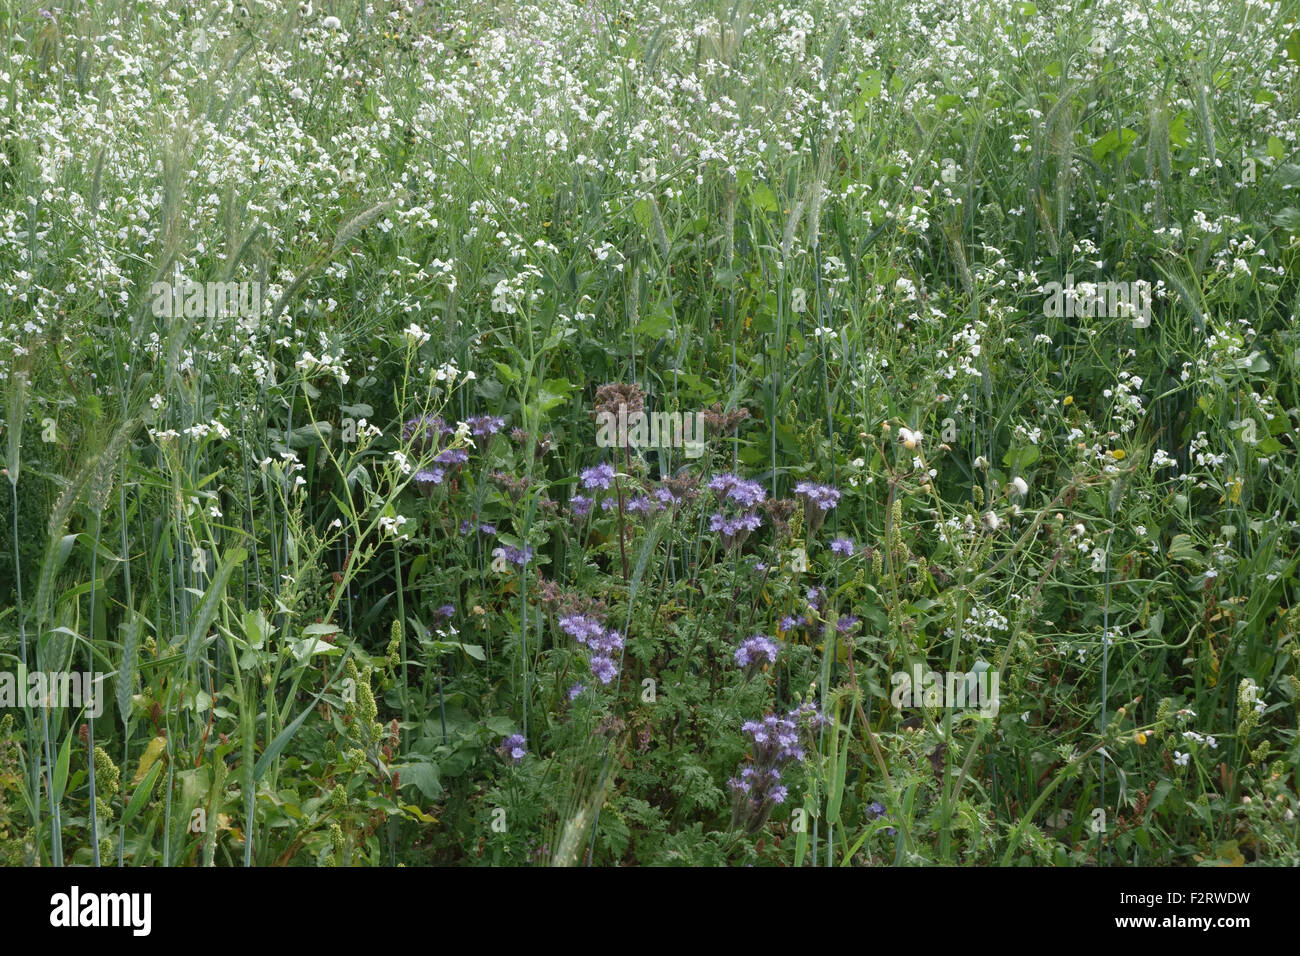 Wildflower margin with flowering plants to attract insects and wildlife alongside farm crops,  Berkshire, September Stock Photo